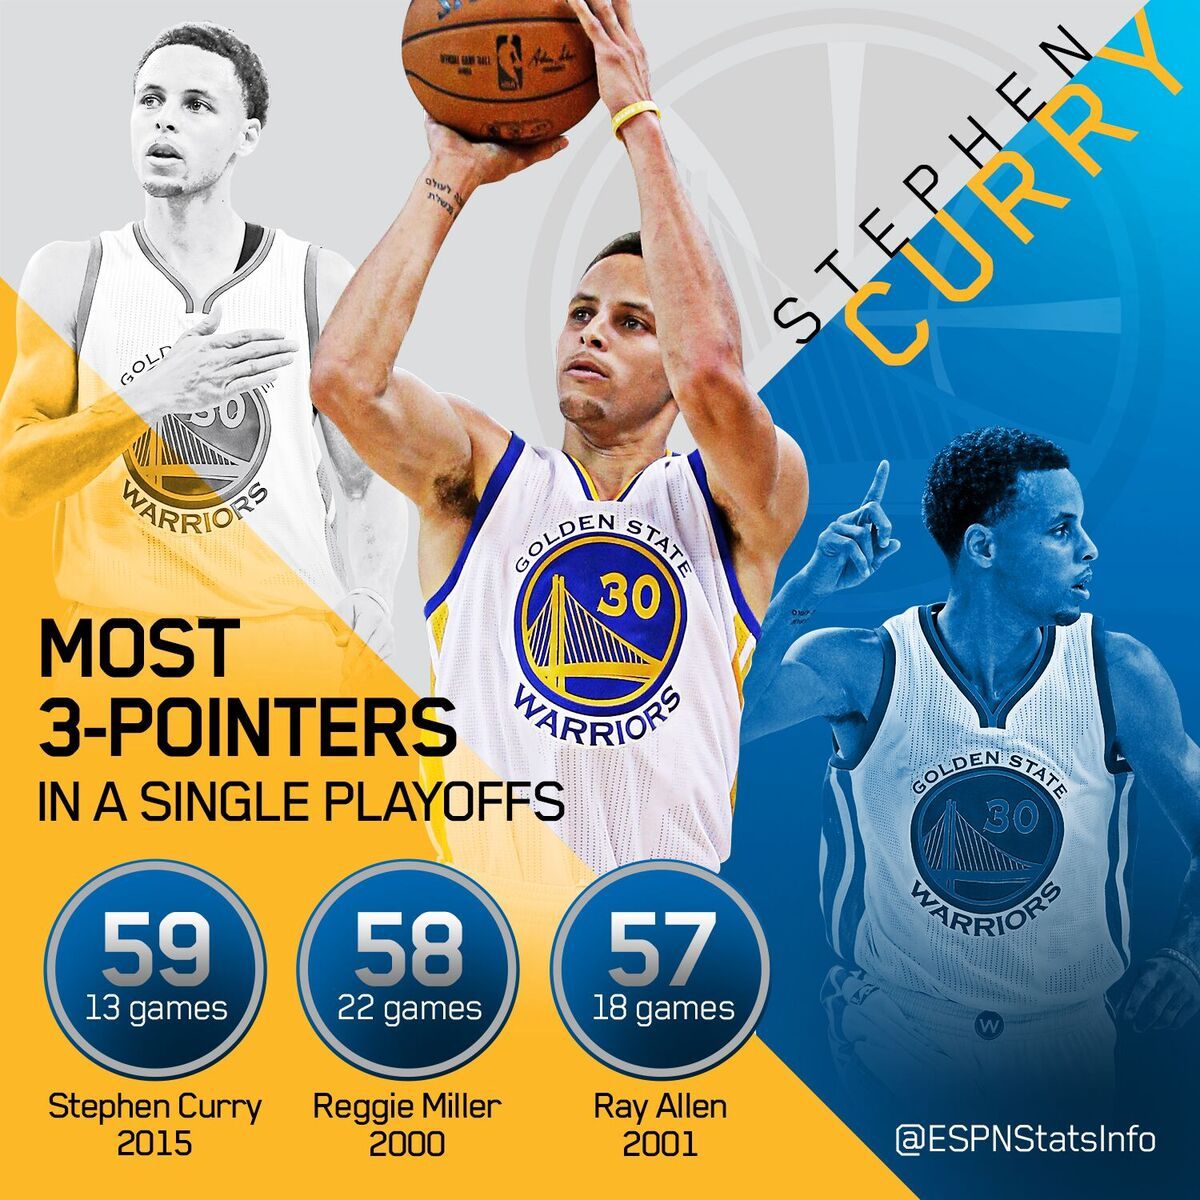 Stephen Curry of the Warriors breaks record for 3s in one postseason